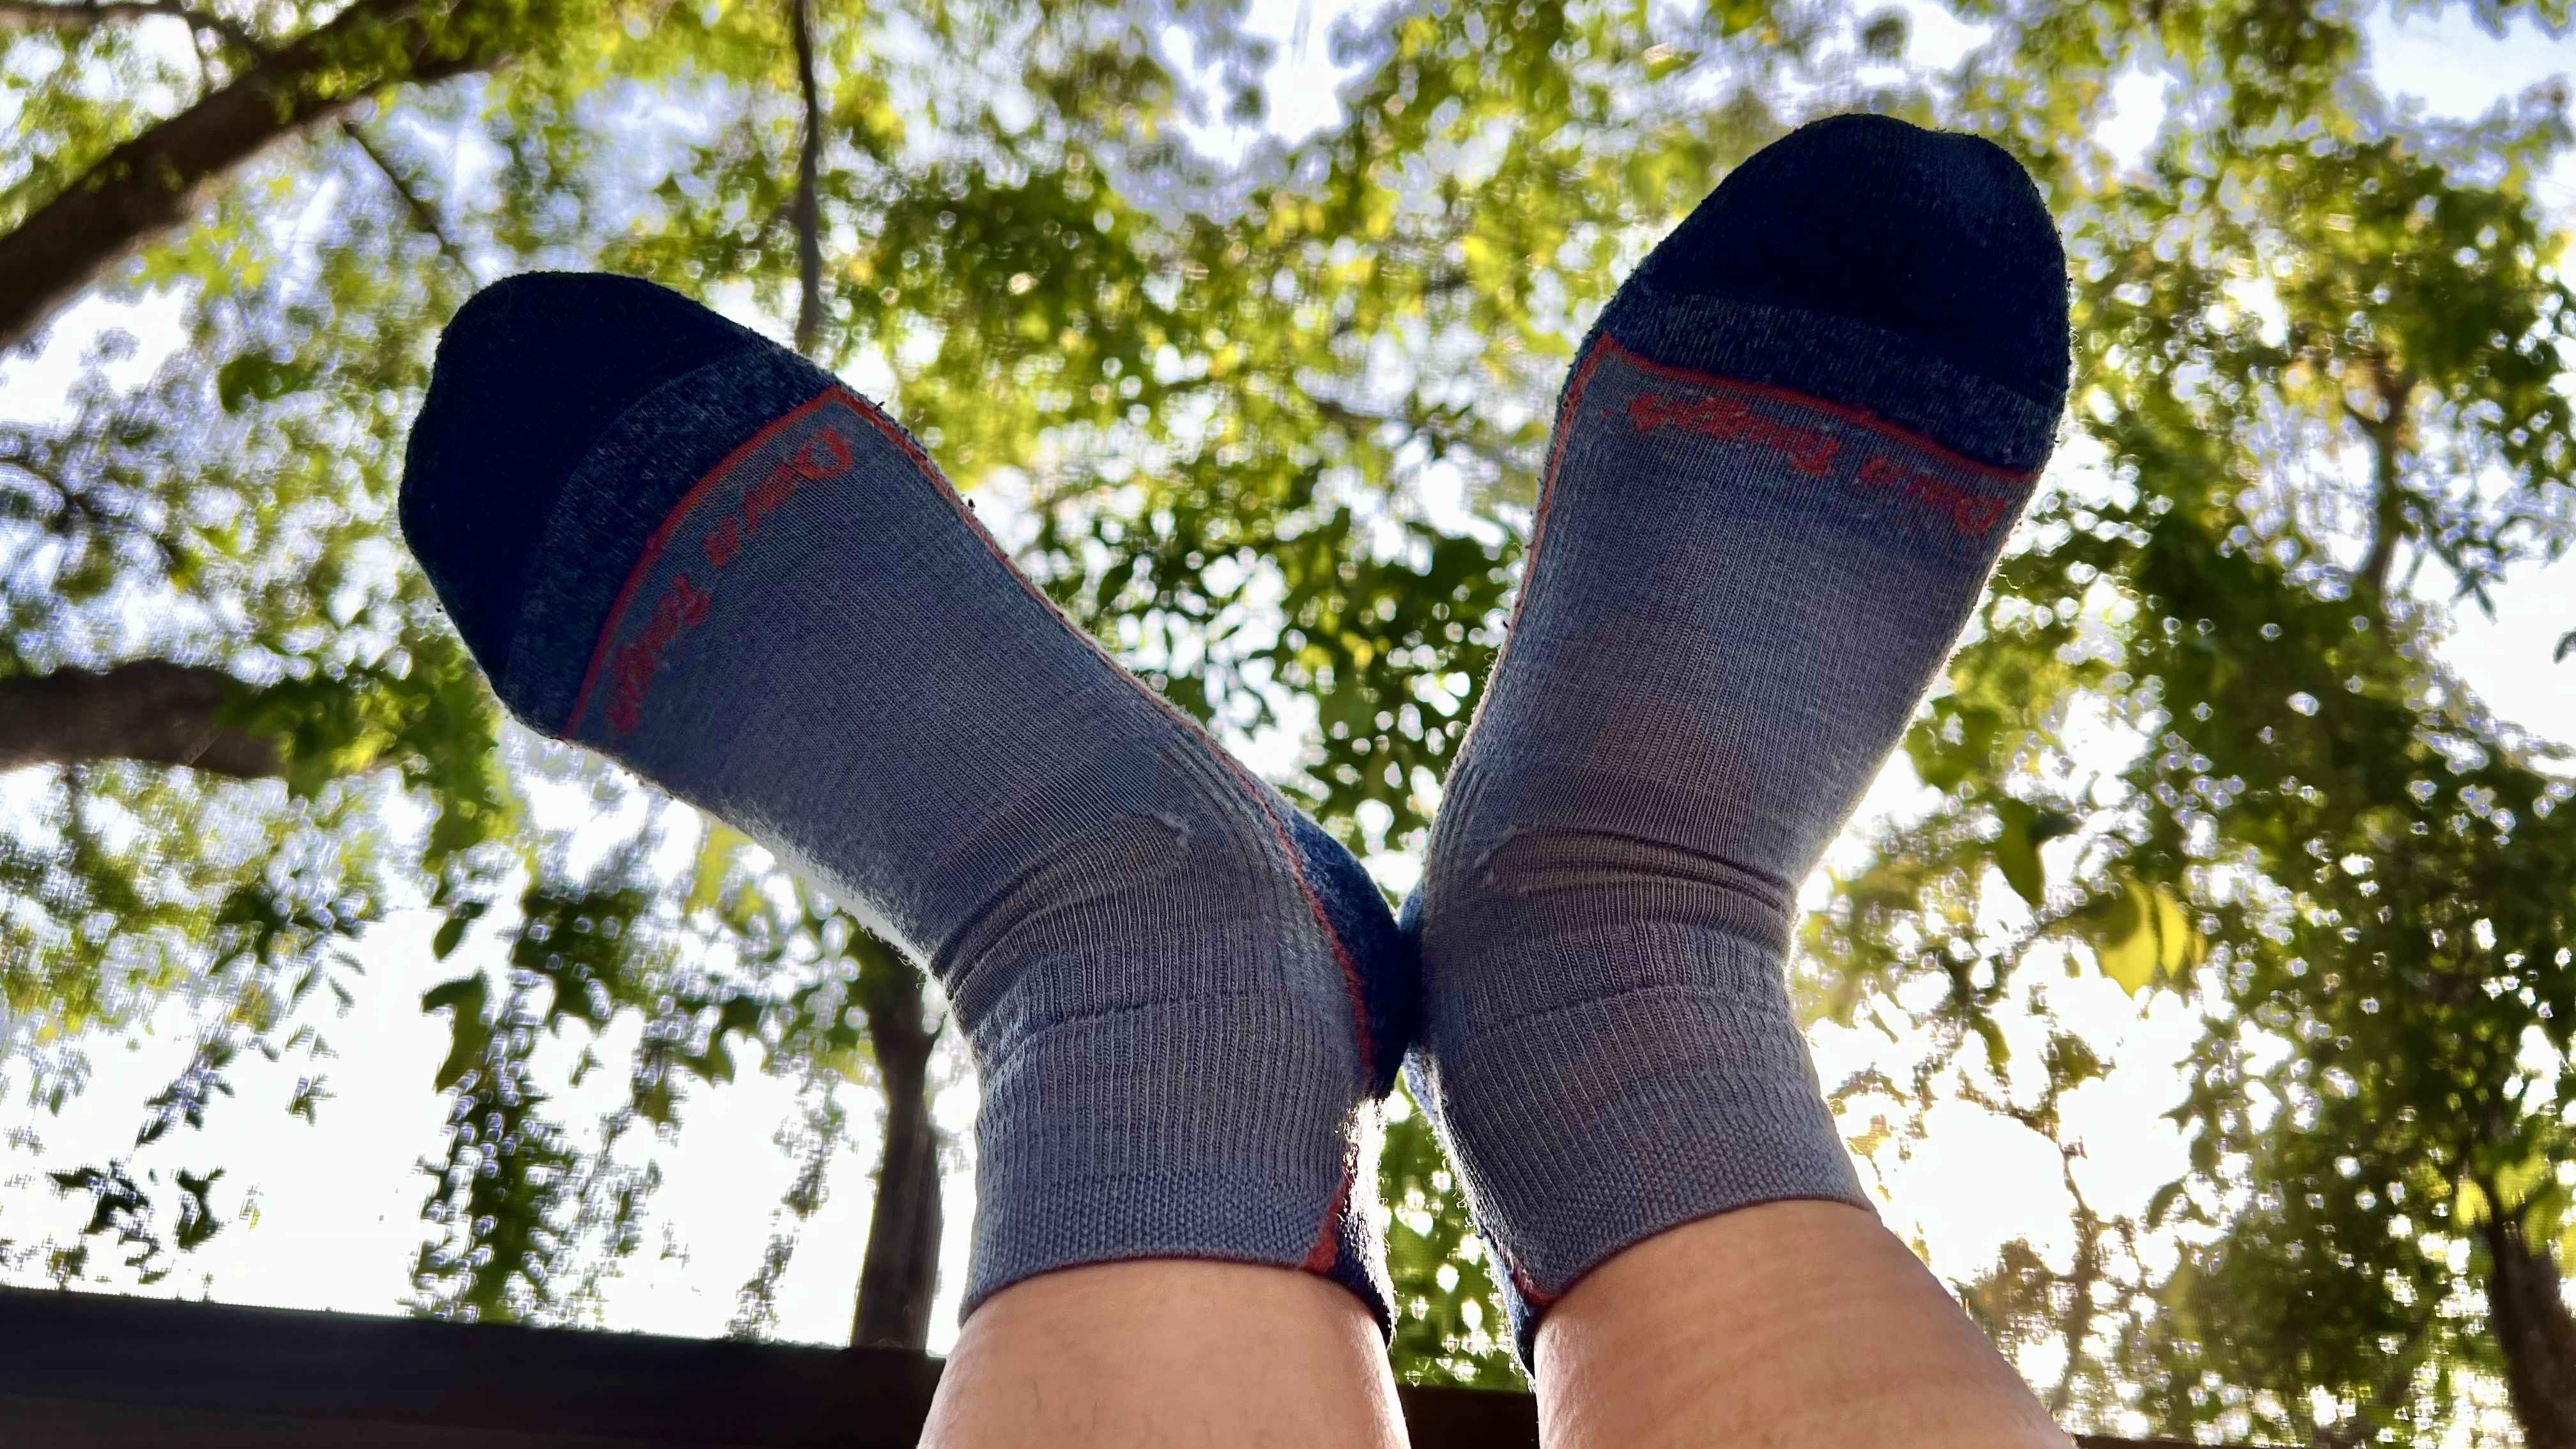 Keep your feet happy with world famous Darn Tough socks